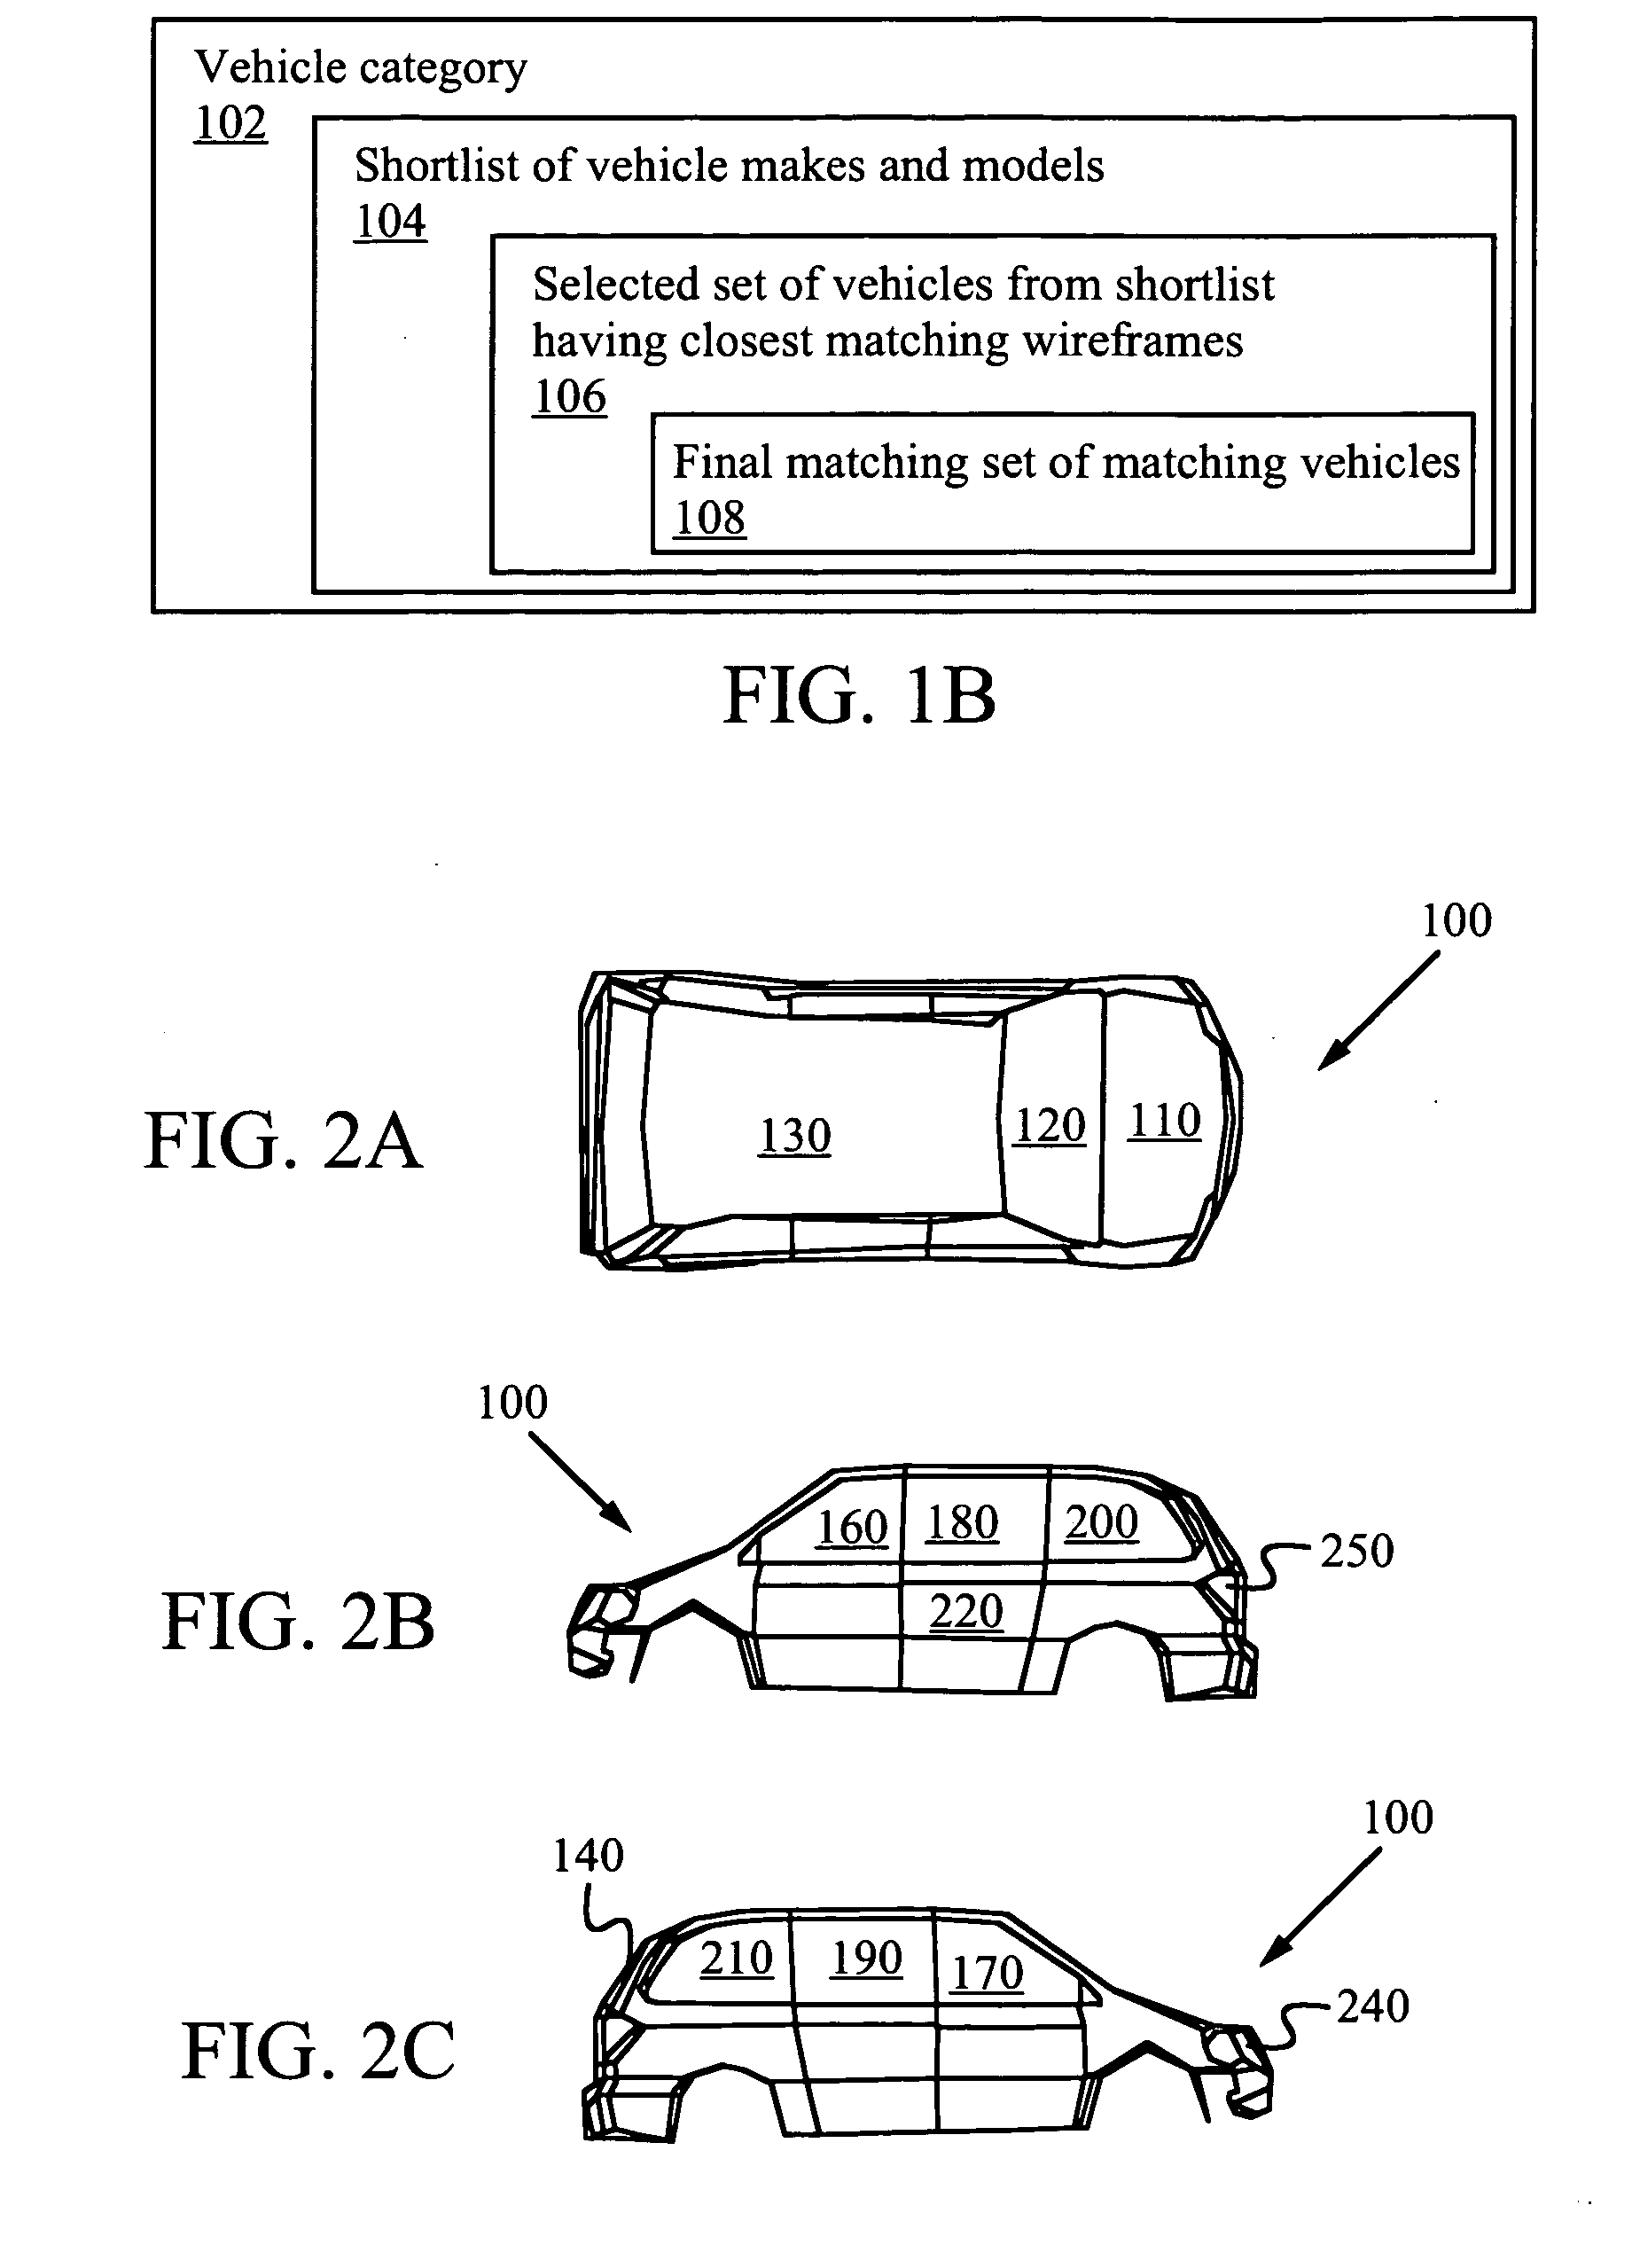 Method for vehicle classification